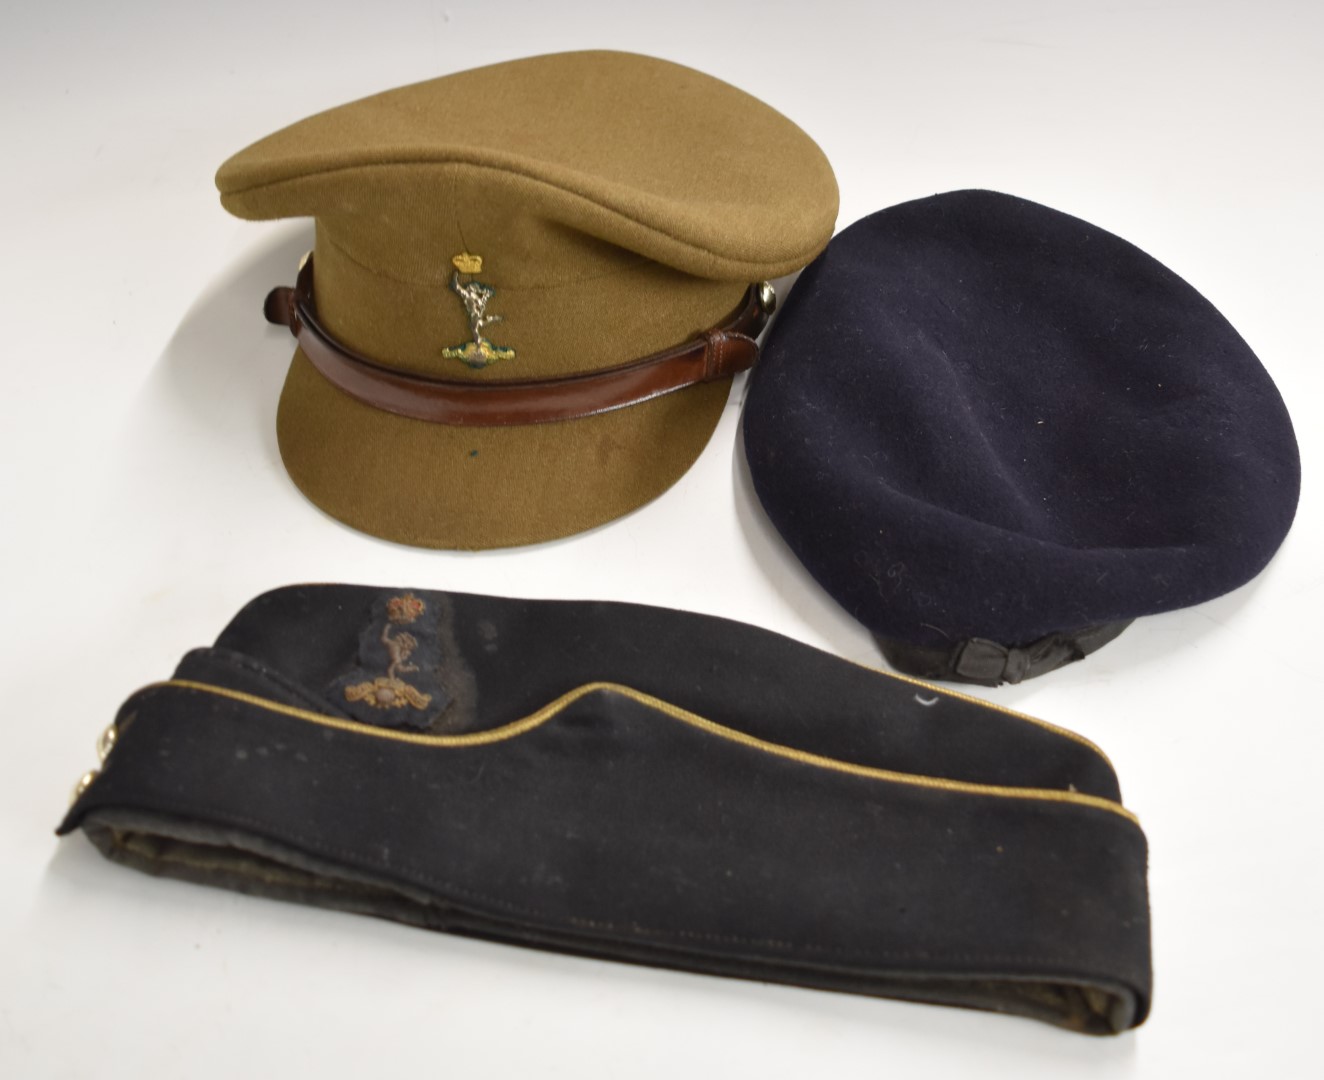 British Army Royal Signals officer's khaki field cap, beret and side hat attributed to Major B H - Image 2 of 9